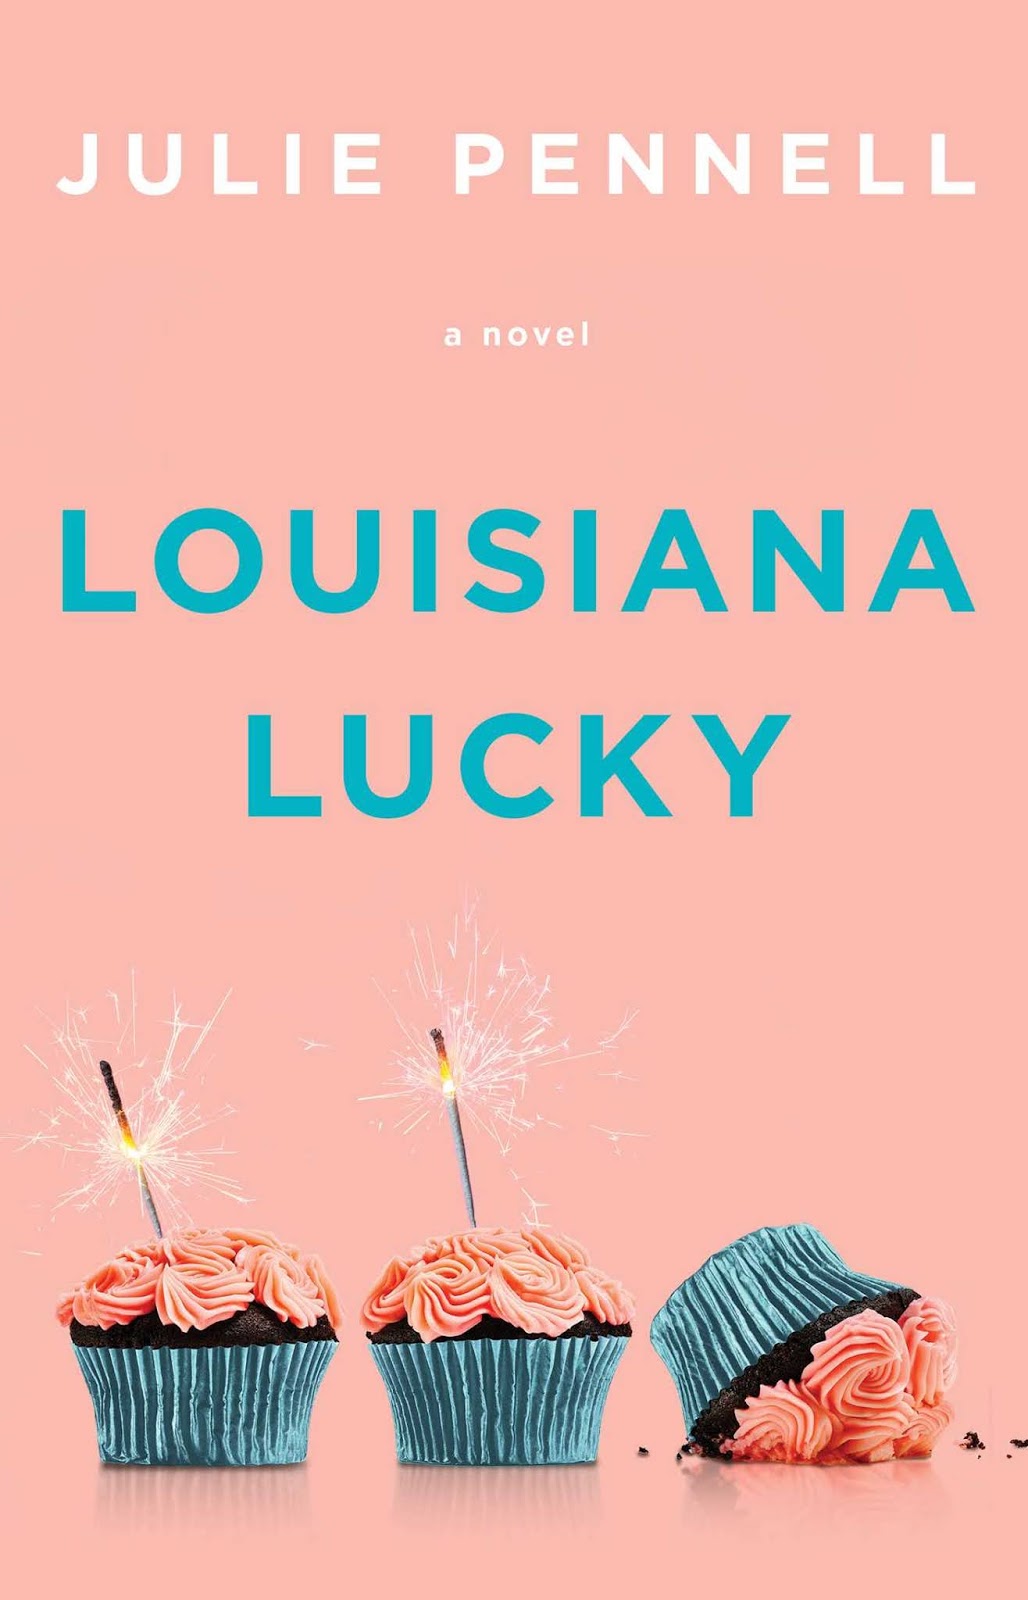 Blog Tour & Review: Louisiana Lucky by Julie Pennell